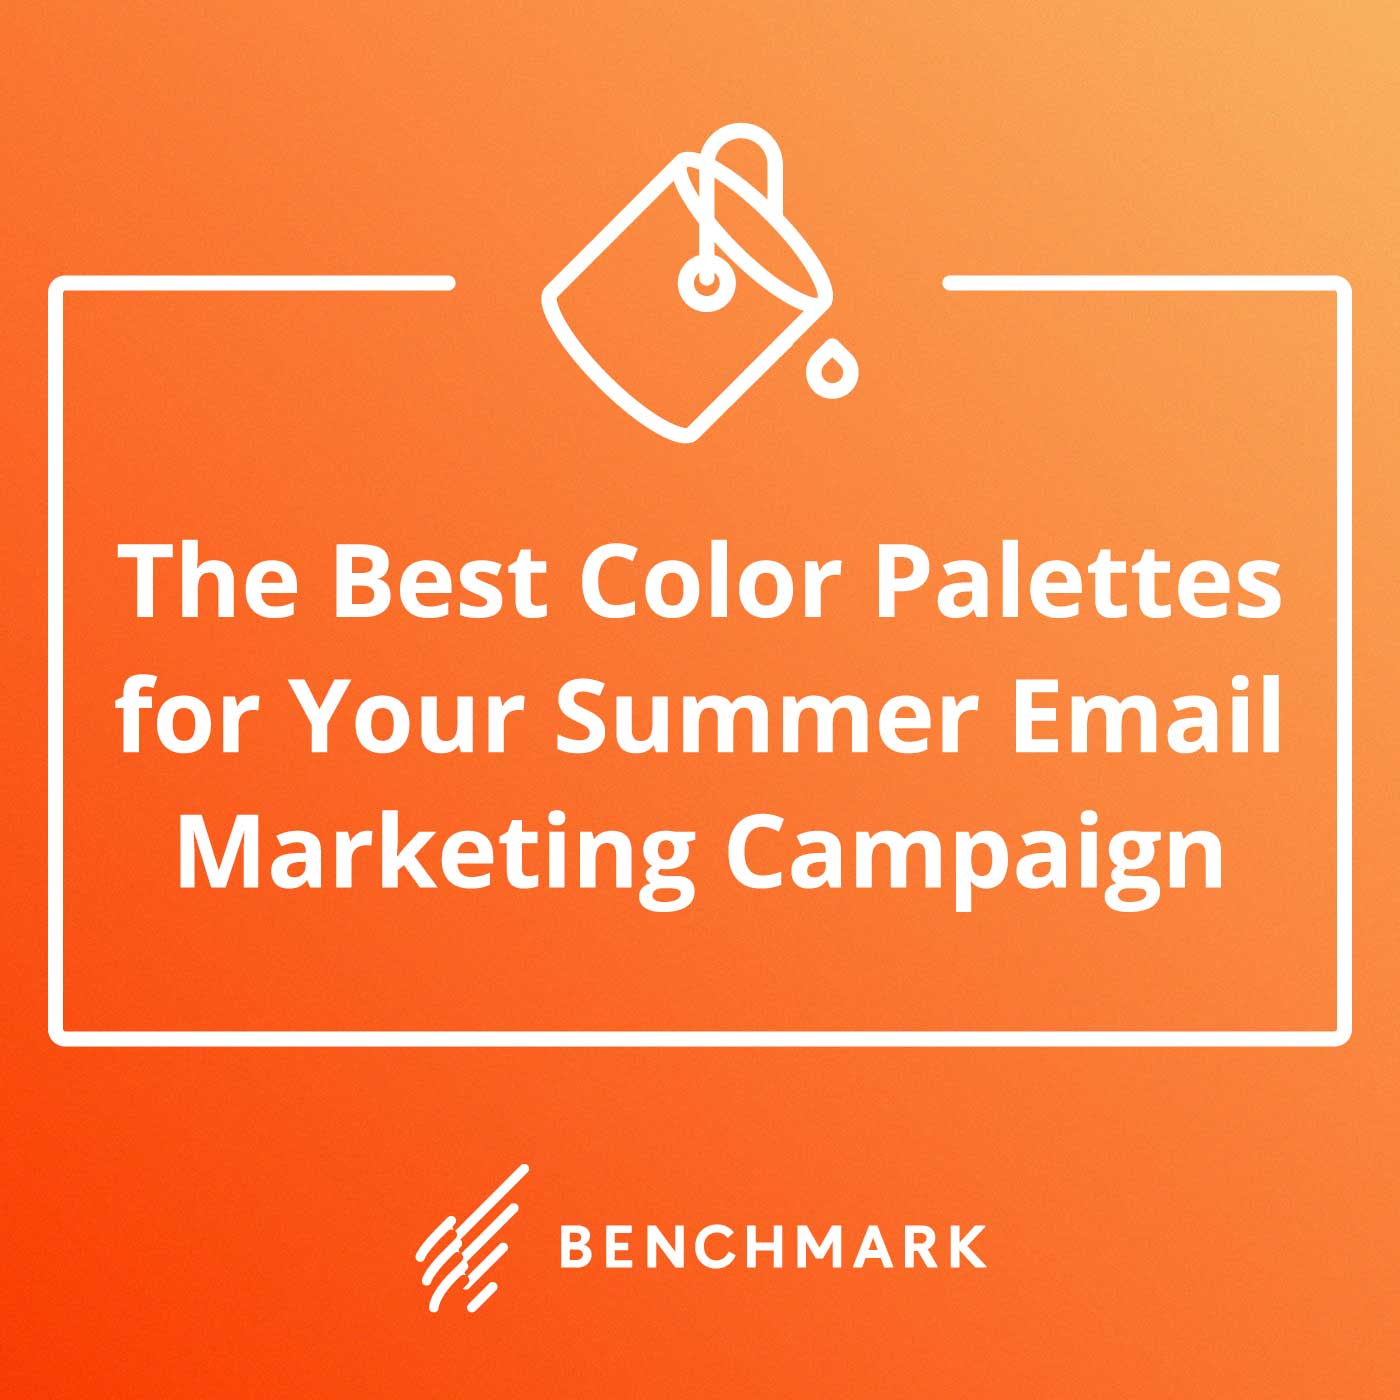 5 Fashion-Inspired Color Palettes for Your Summer Email Marketing Campaigns